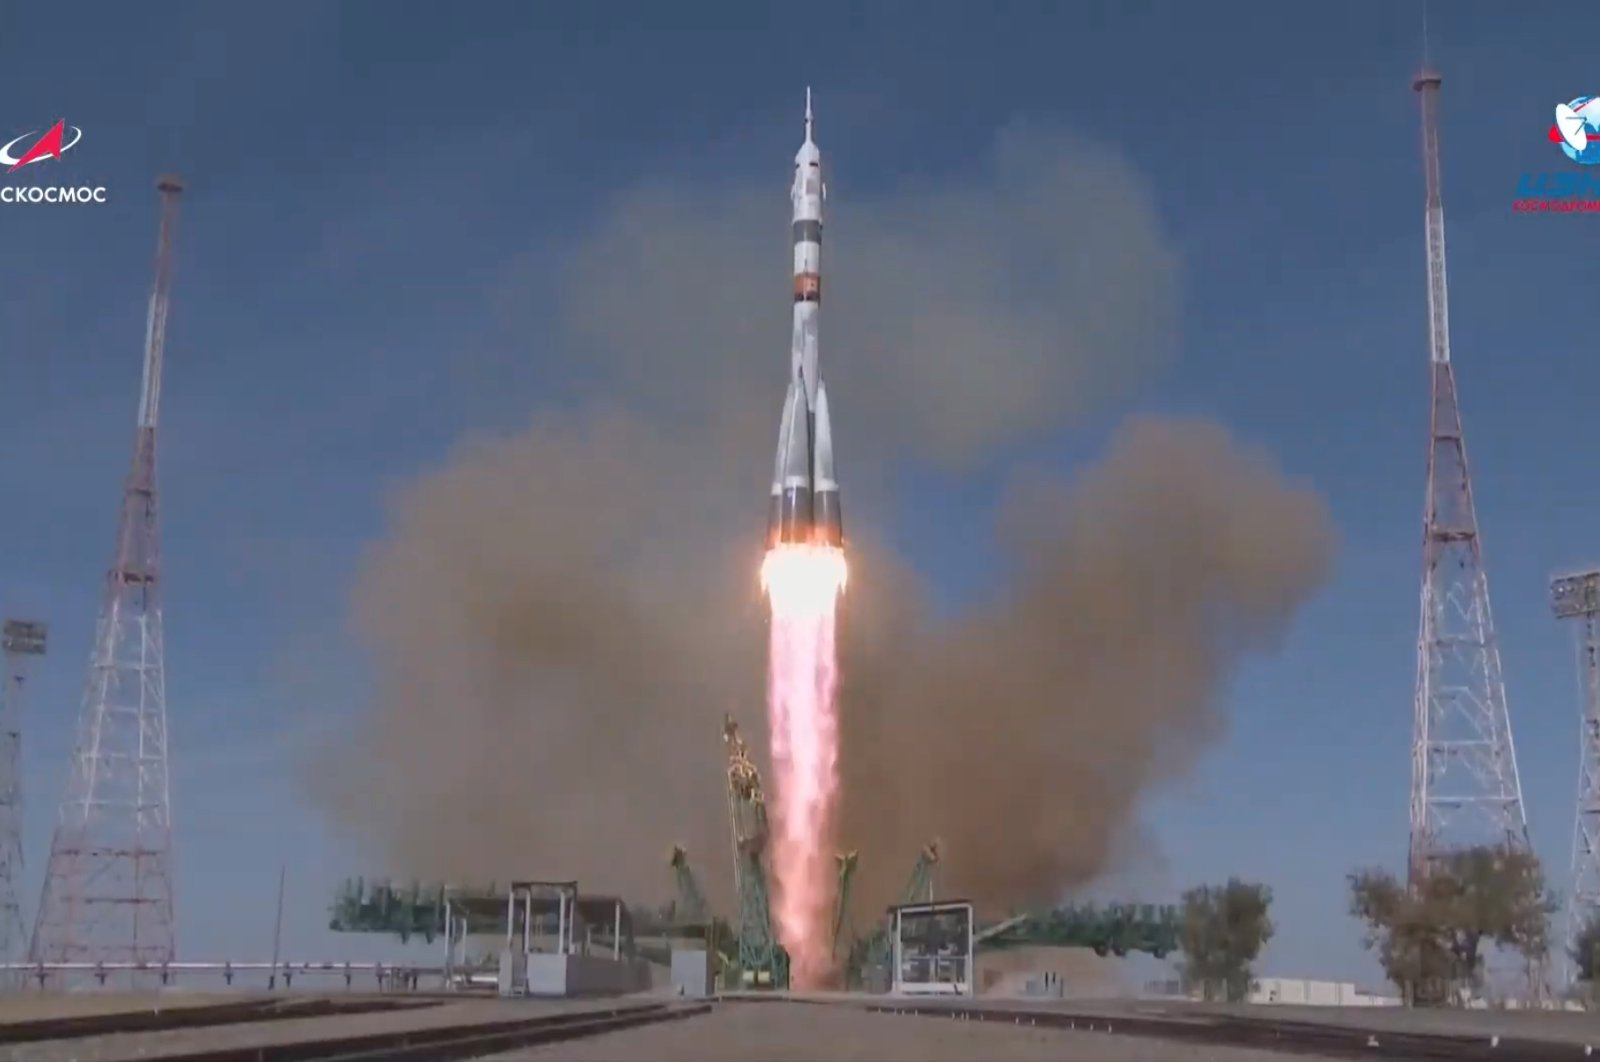 The Soyuz MS-17 spacecraft carrying the crew formed of Kathleen Rubins of NASA, Sergey Ryzhikov and Sergey Kud-Sverchkov of the Russian space agency Roscosmos blasts off to the International Space Station (ISS) from the launchpad at the Baikonur Cosmodrome, Kazakhstan in this still image taken from video, Oct. 14, 2020. (Russian space agency Roscosmos via Reuters)